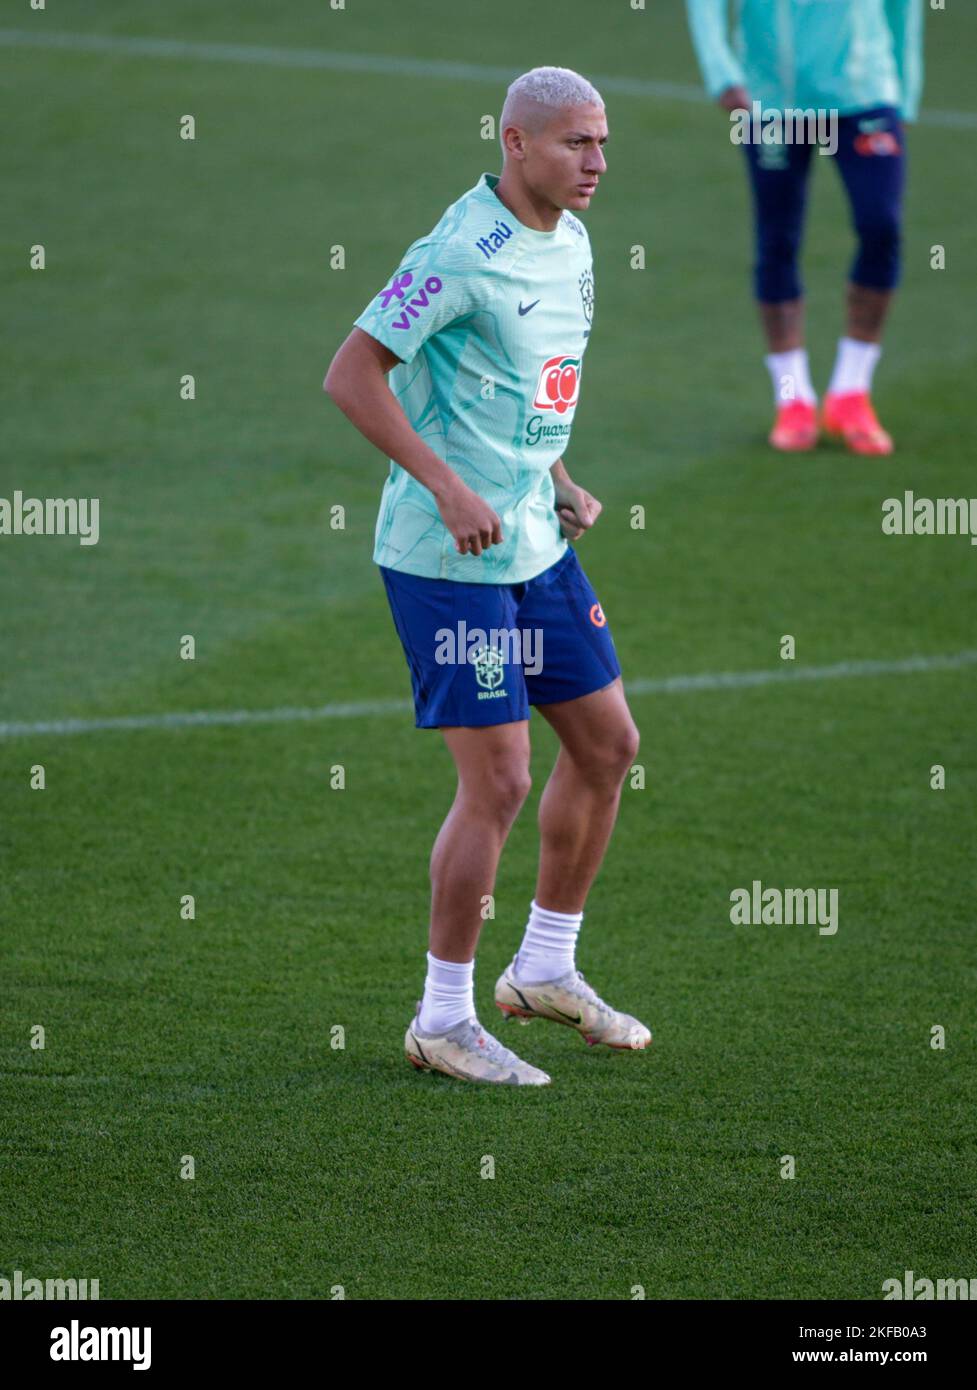 World cup 2022 brazil team hi-res stock photography and images - Alamy